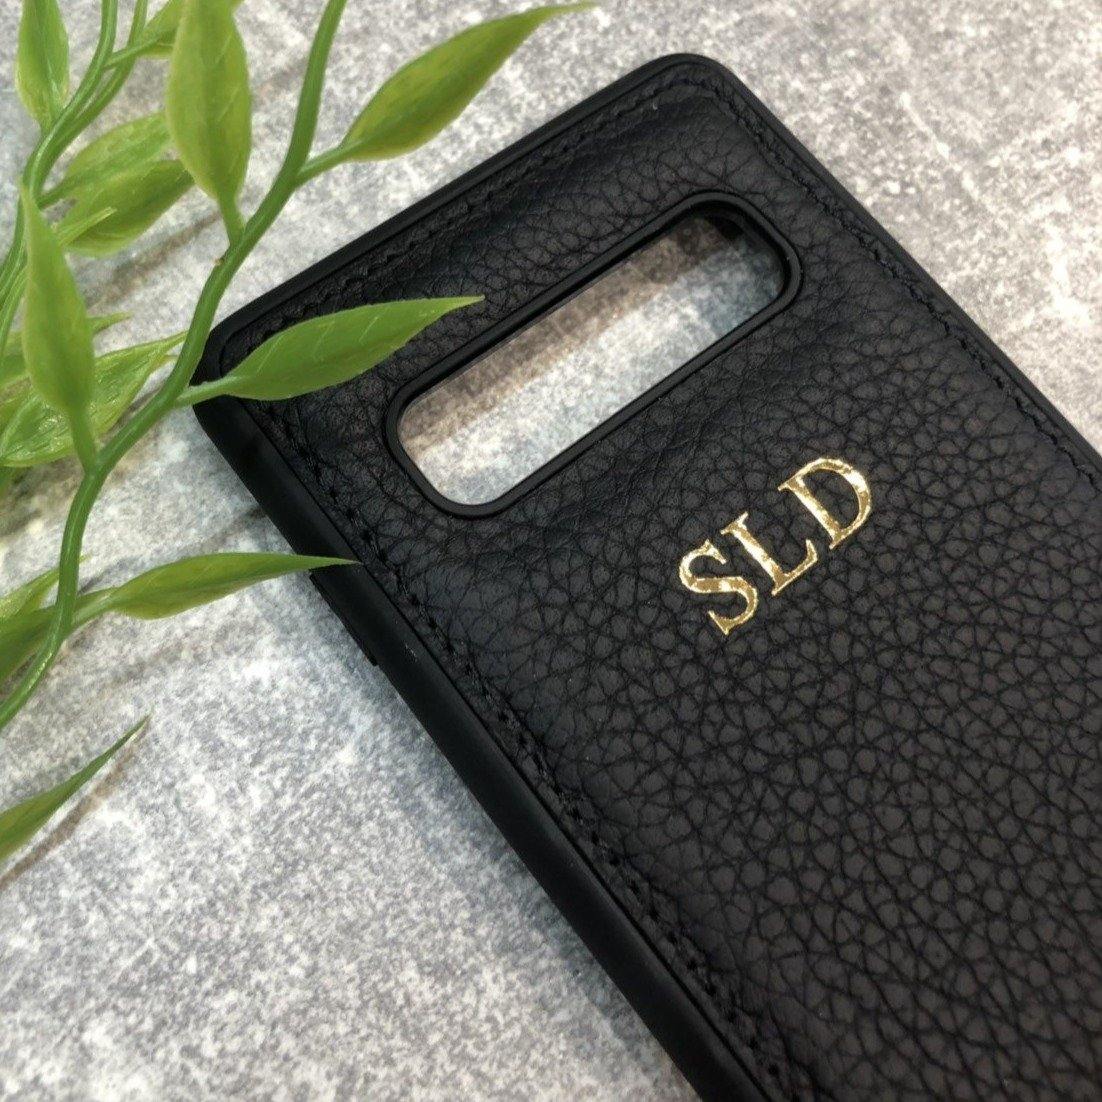 Samsung S10 PLUS leather phone case personalised with name/initials - PersonalisebyLisa